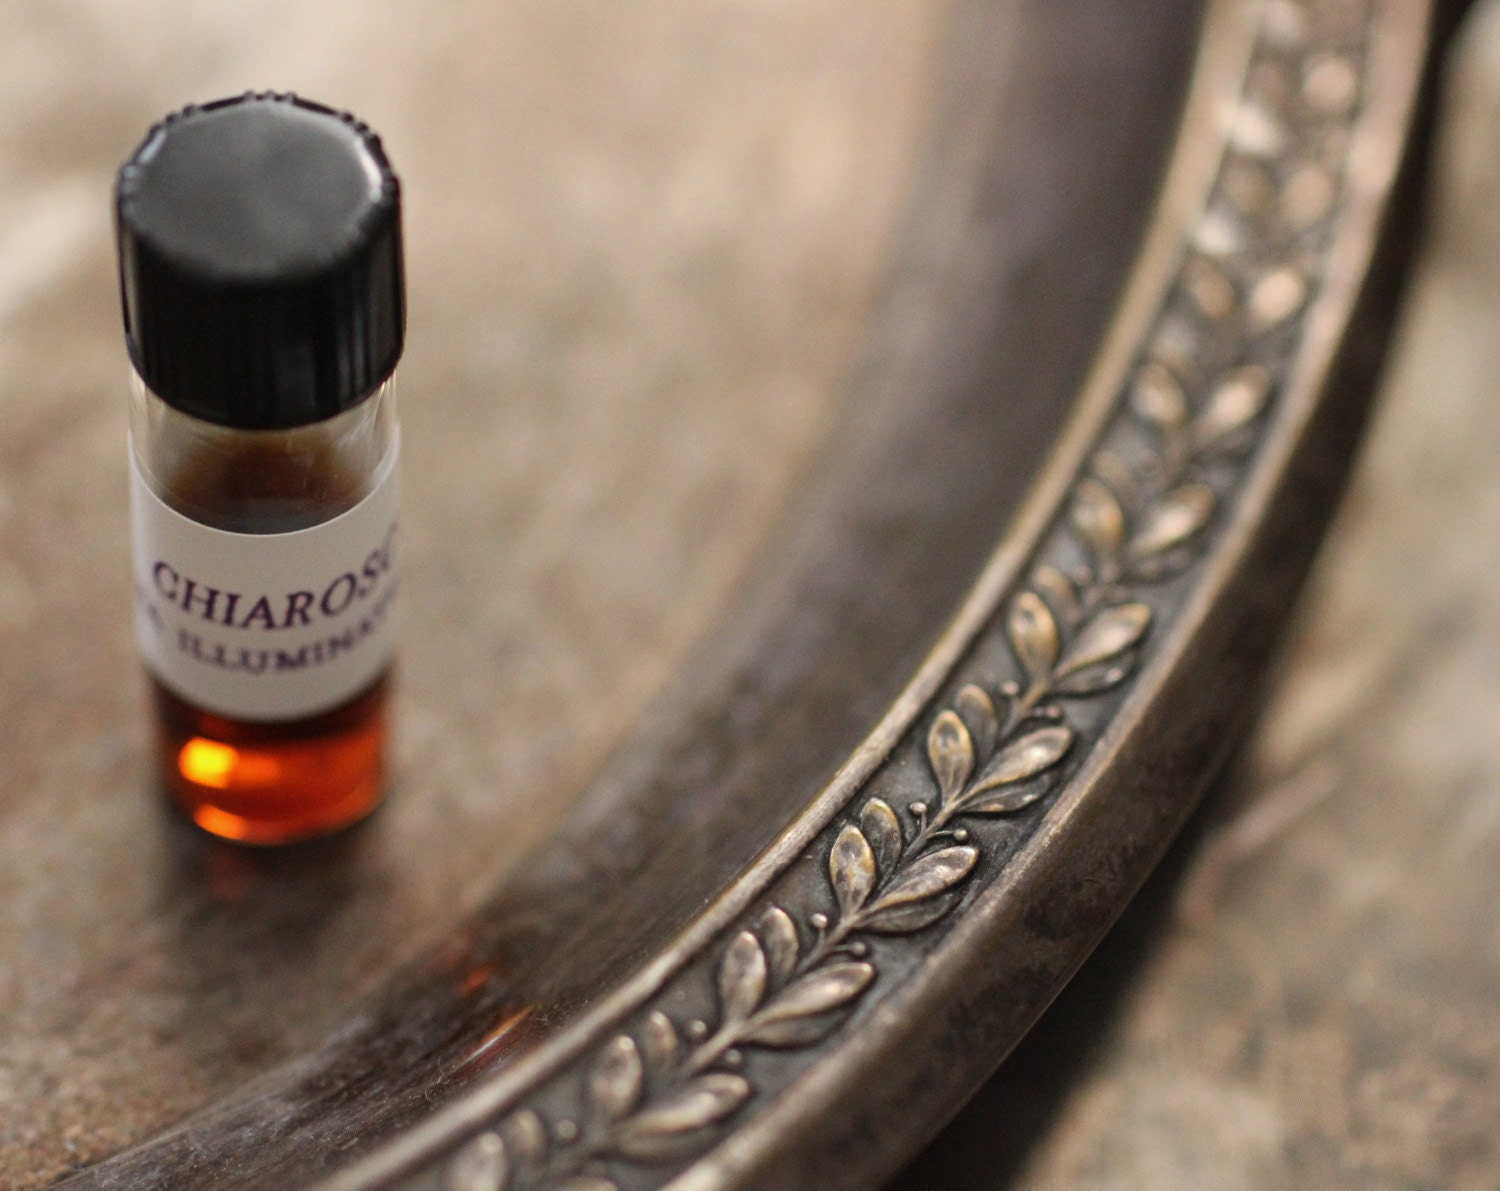 Chiaroscuro is a liquid, organic natural perfume - 1 gram vial - She is the light of the luminous moon and the darkness of the night - IlluminatedPerfume